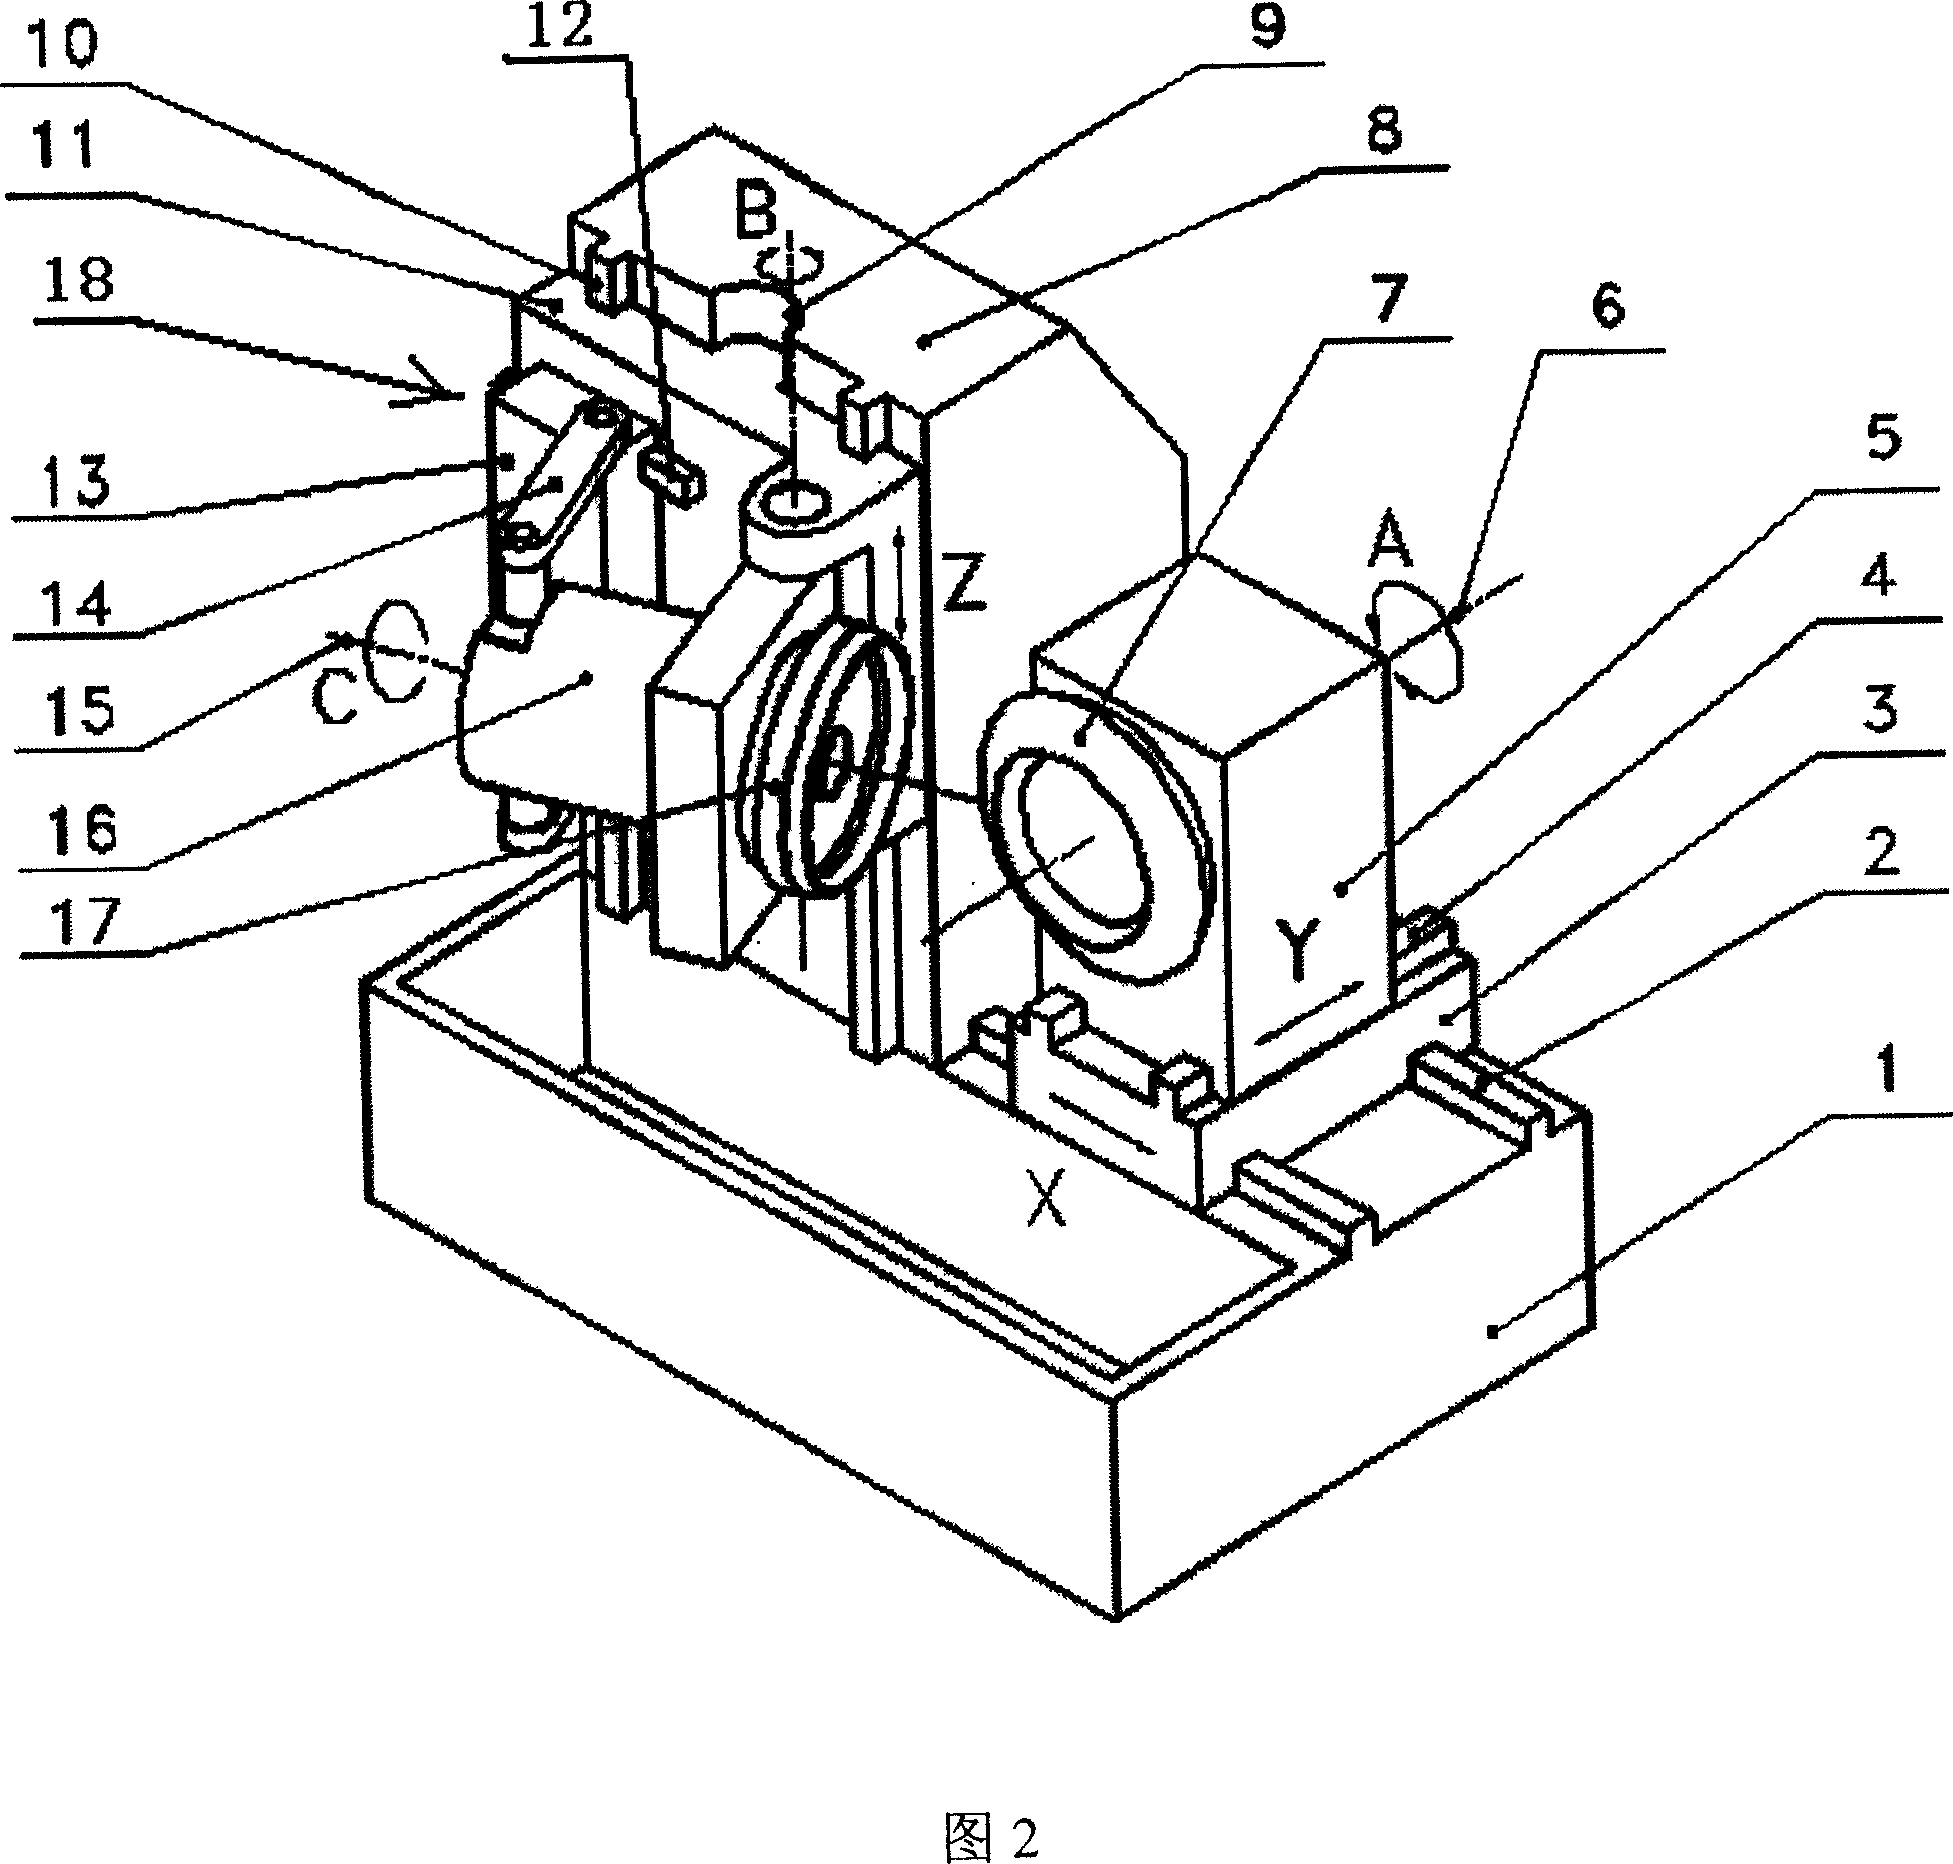 Machine tool for processing spiral taper gear with six axes, five linkage axes